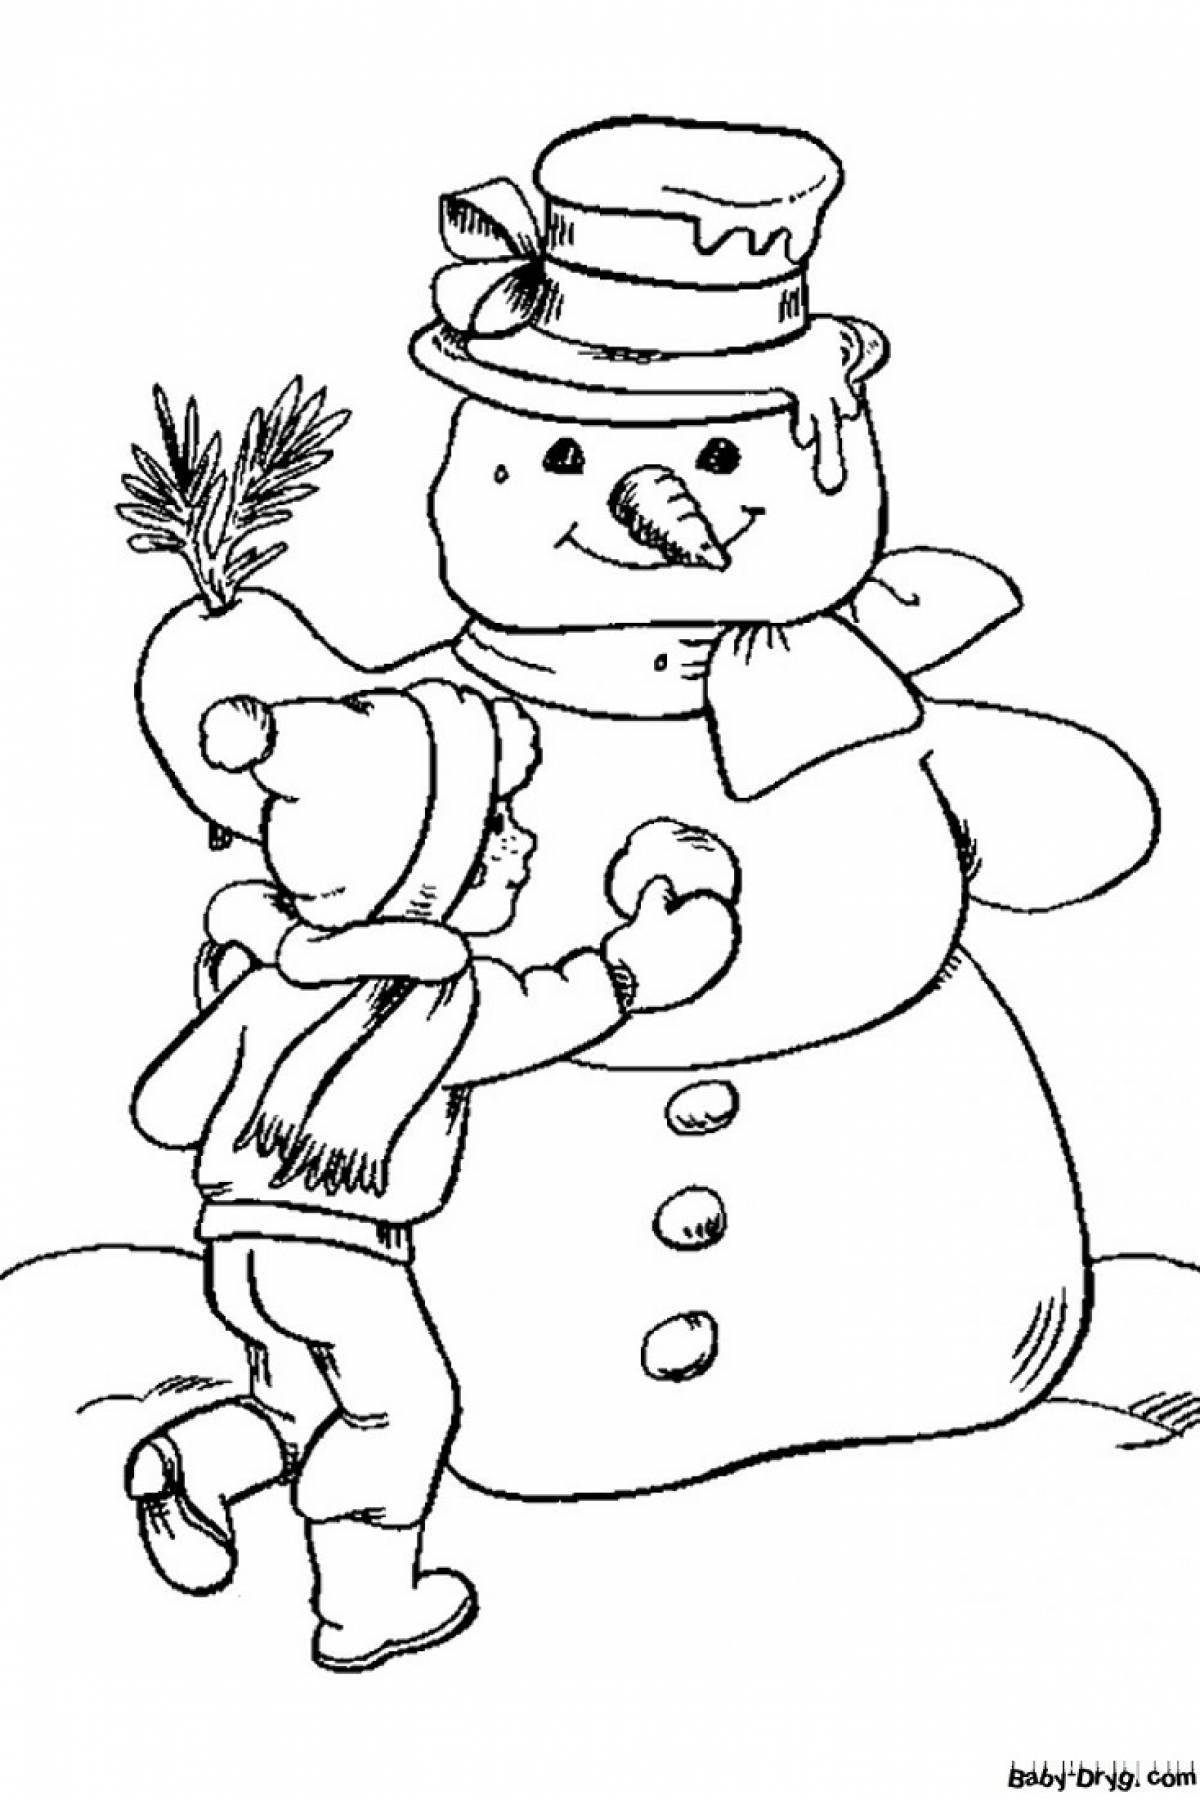 Live Christmas snowman coloring book